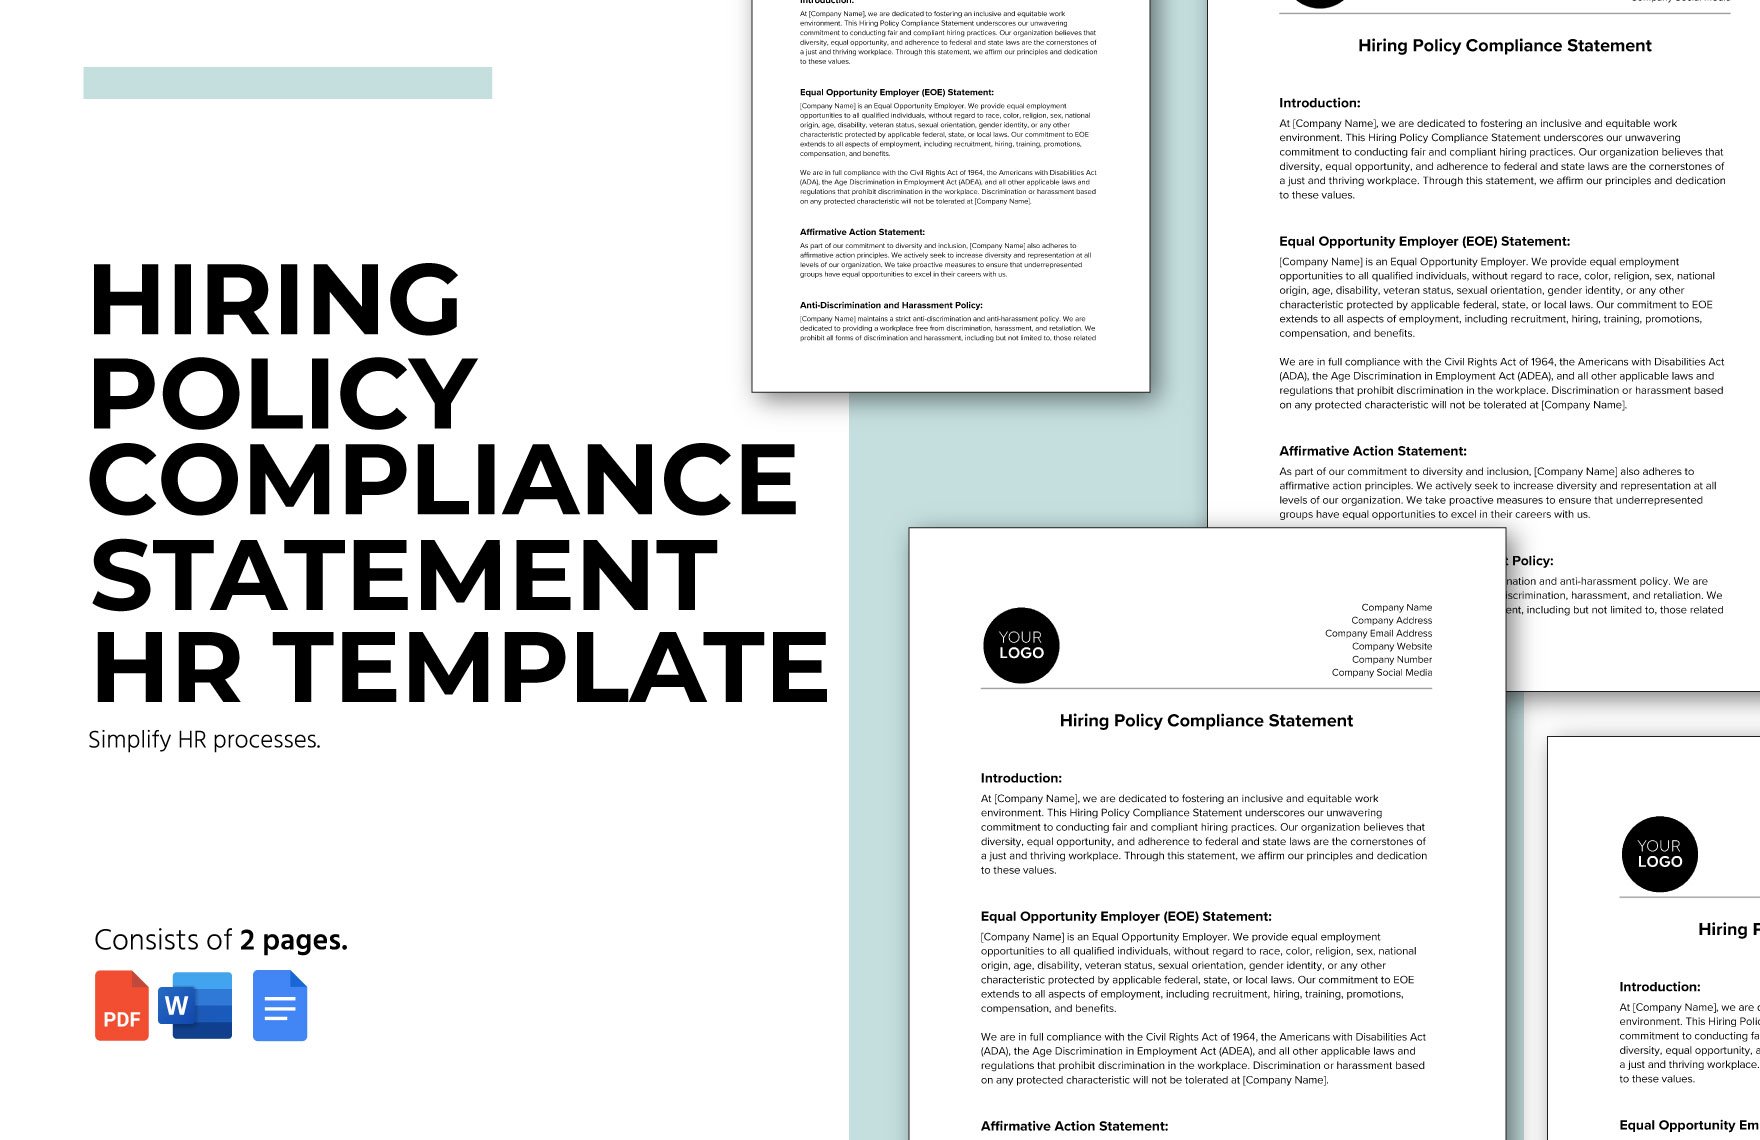 Hiring Policy Compliance Statement HR Template in Word, Google Docs, PDF